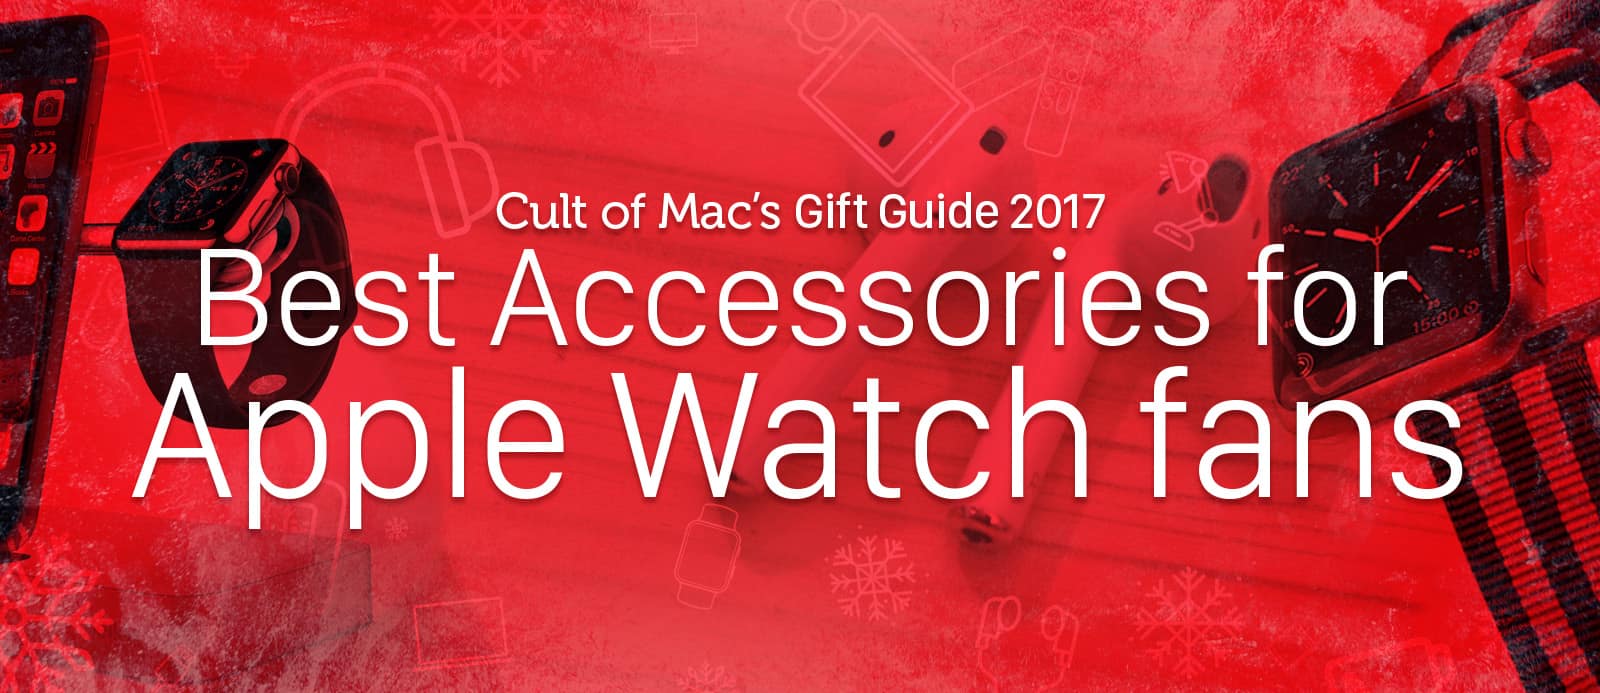 Apple Watch gift guide